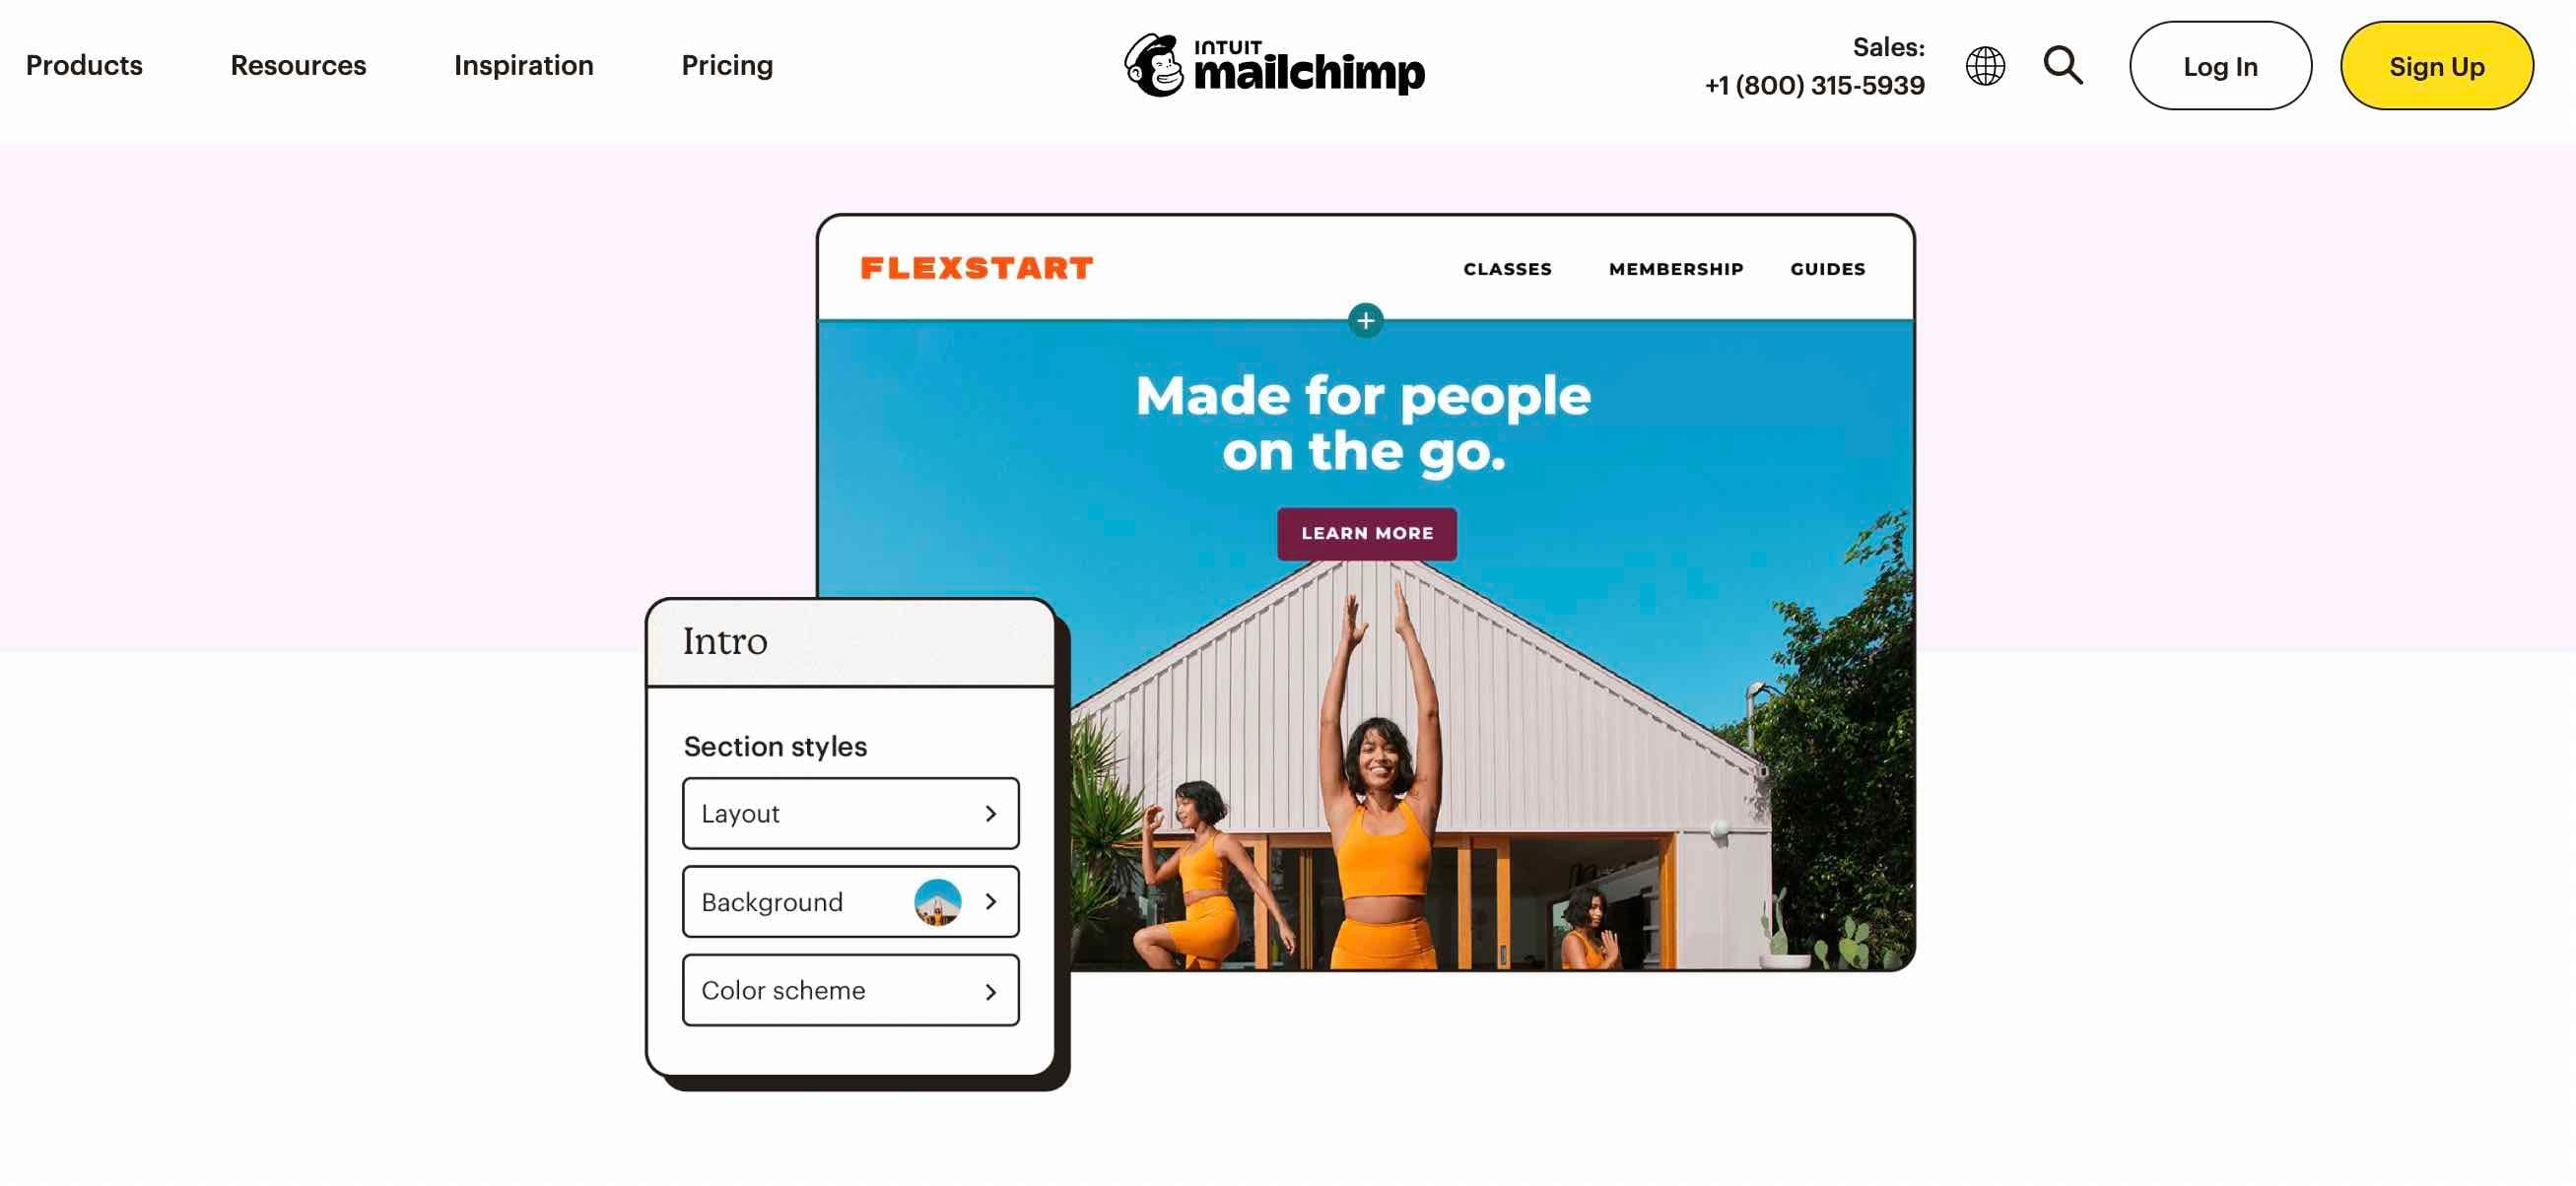 free website builder mailchimp%20(1).jpg?width=2614&height=1204&name=free website builder mailchimp%20(1) - 17 of the Best Free Website Builders to Check Out in 2023